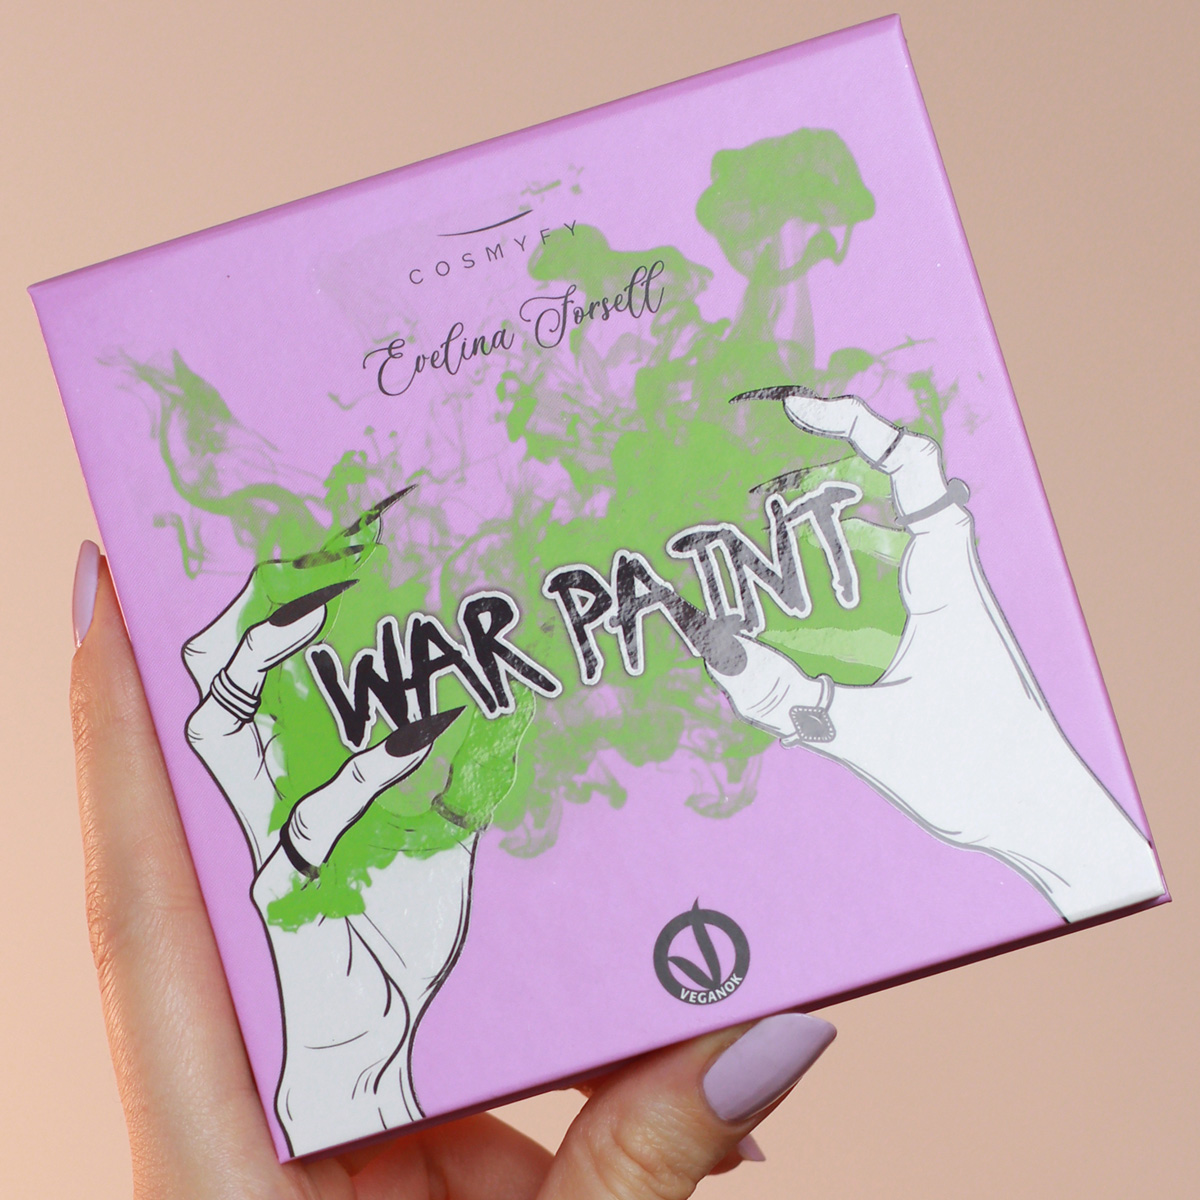 Cosmyfy Evelina Forsell War Paint Palette